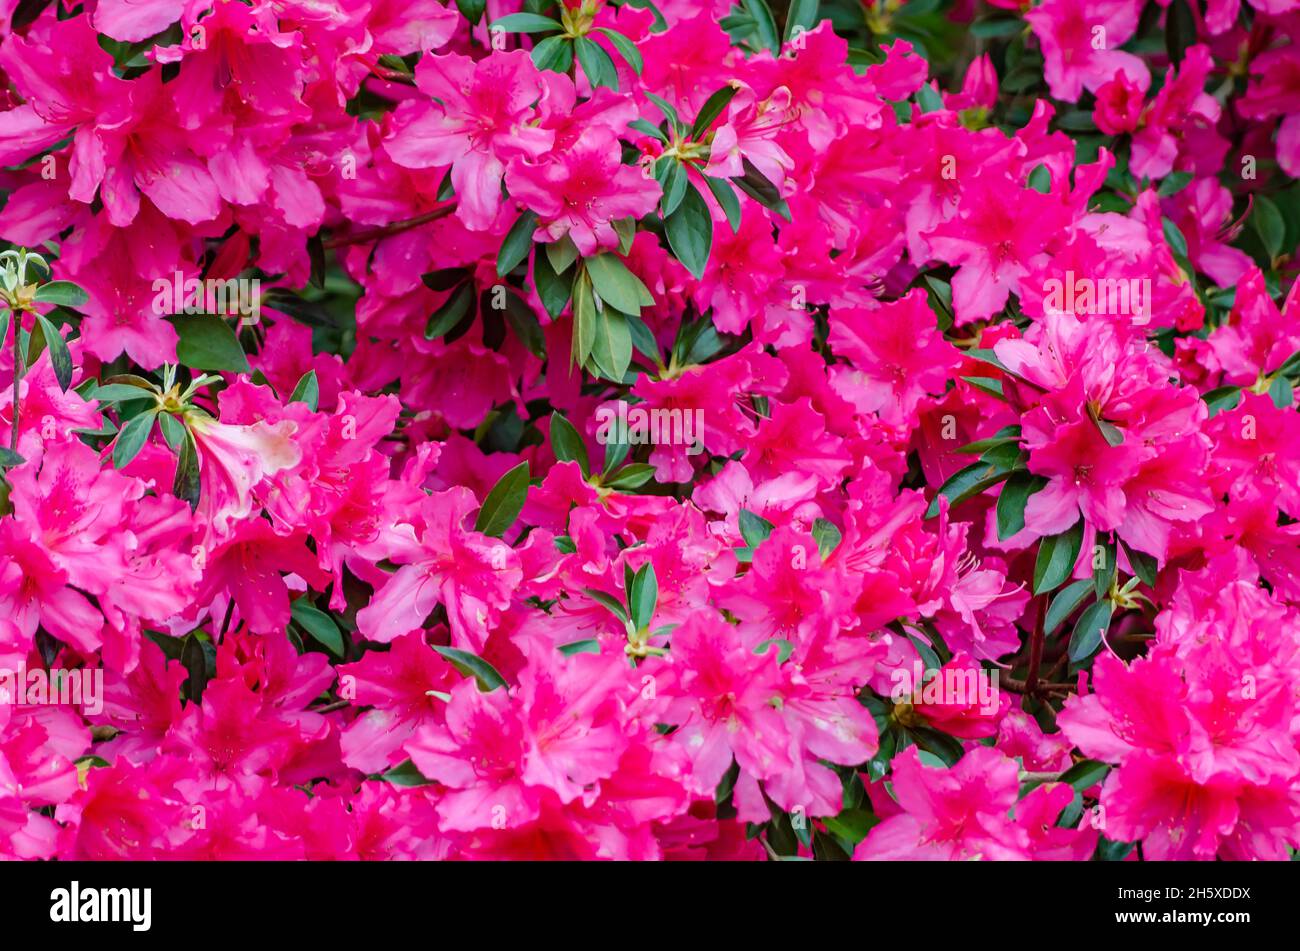 Southern Indian azaleas (Rhododendron indicum) bloom, April 8, 2014, in Mobile, Alabama. Stock Photo